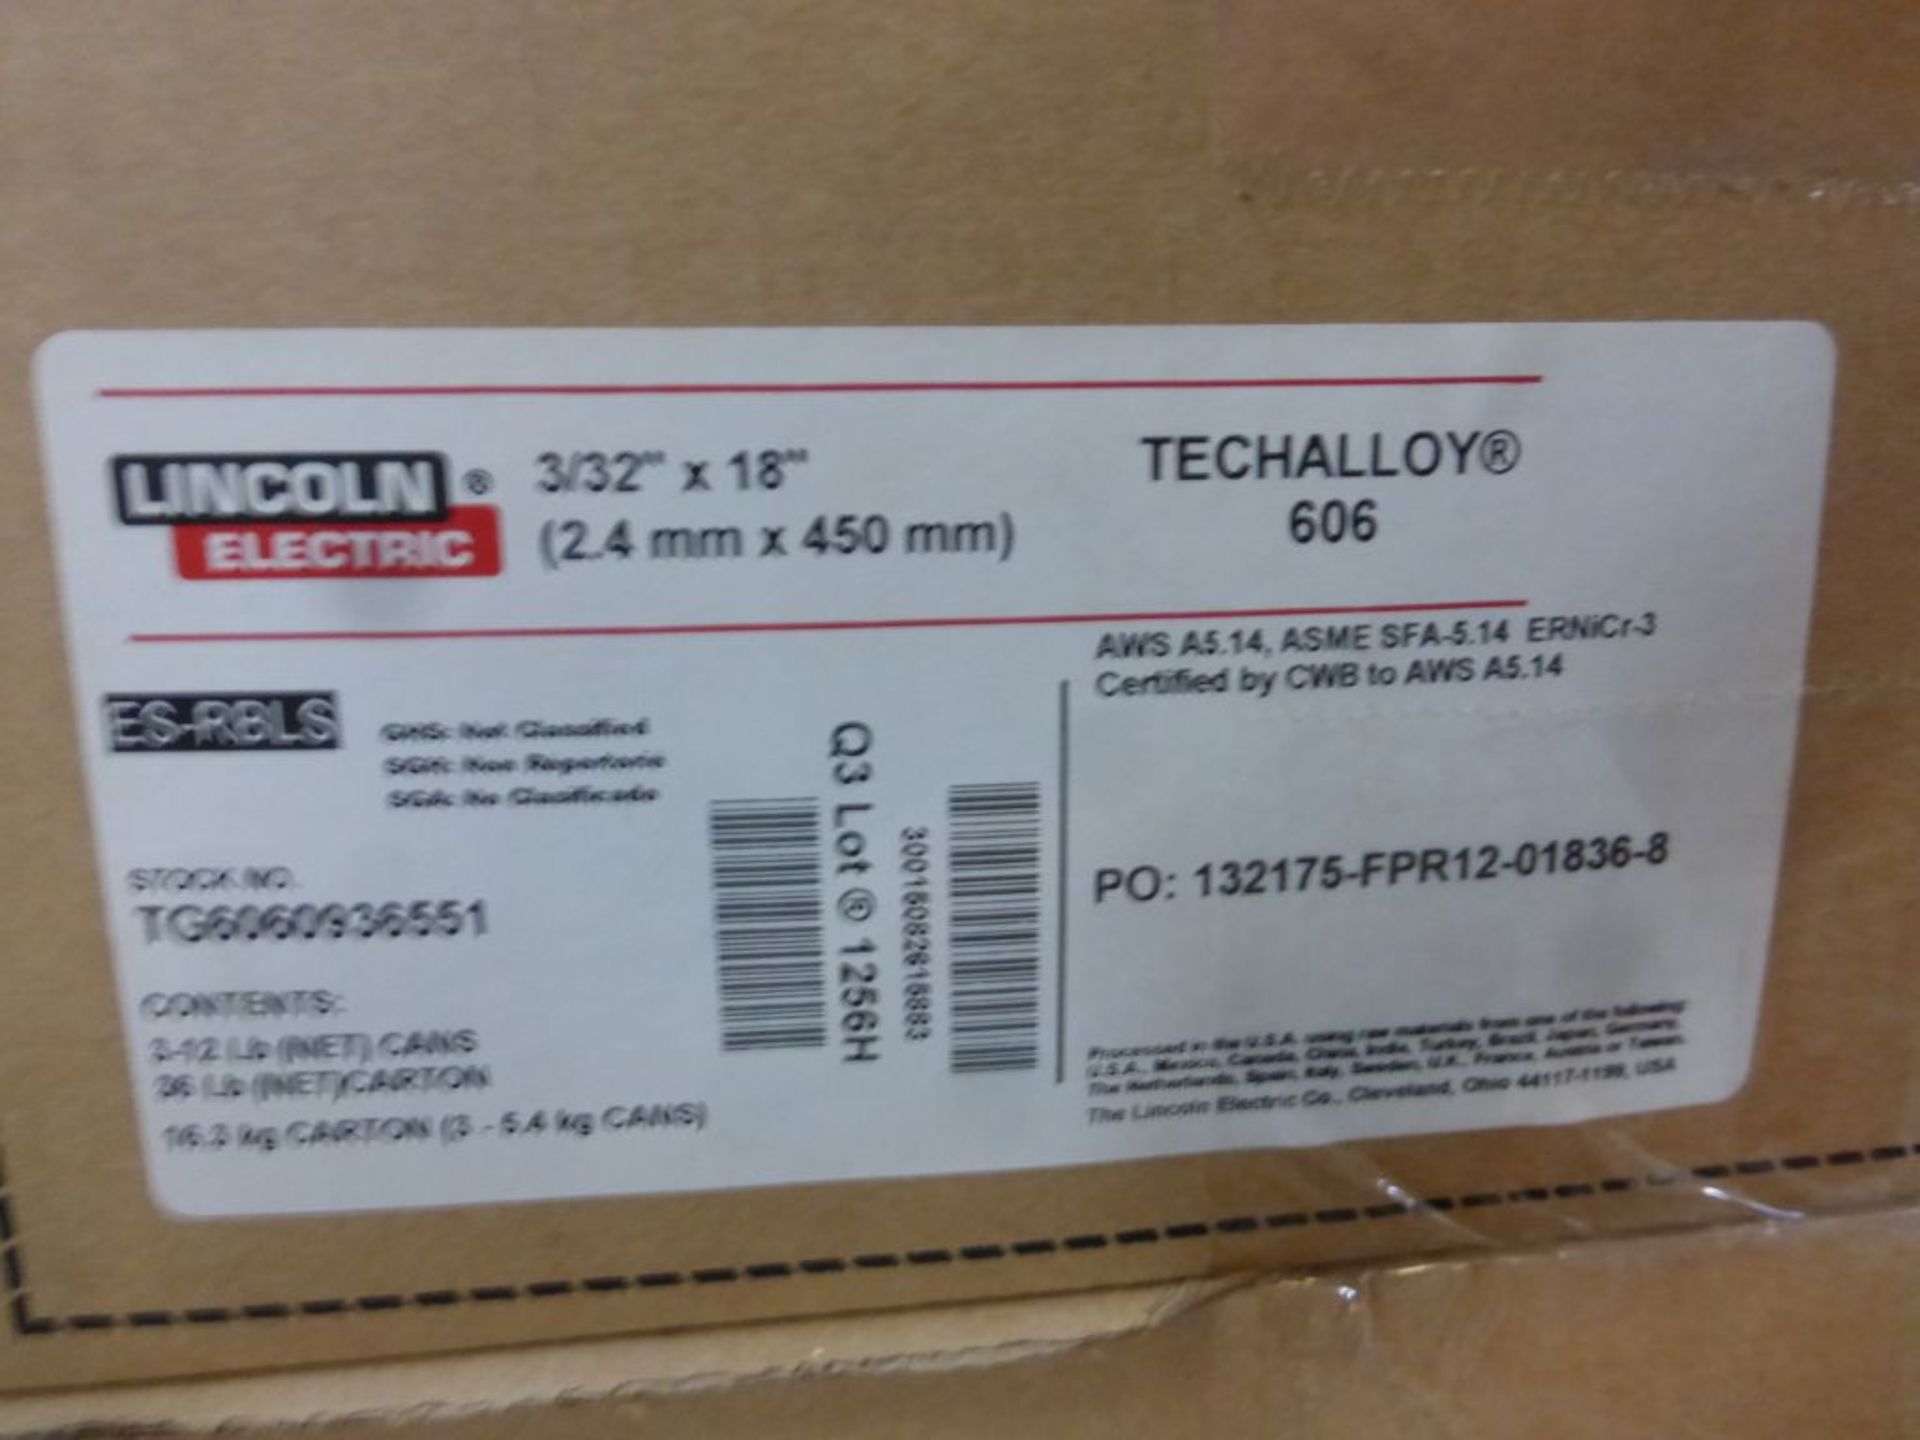 Lot of (8) Boxes of Lincoln Electric Techalloy 606 Welding Wire | Stock No. TG6060936551; 3/32" x - Image 12 of 12